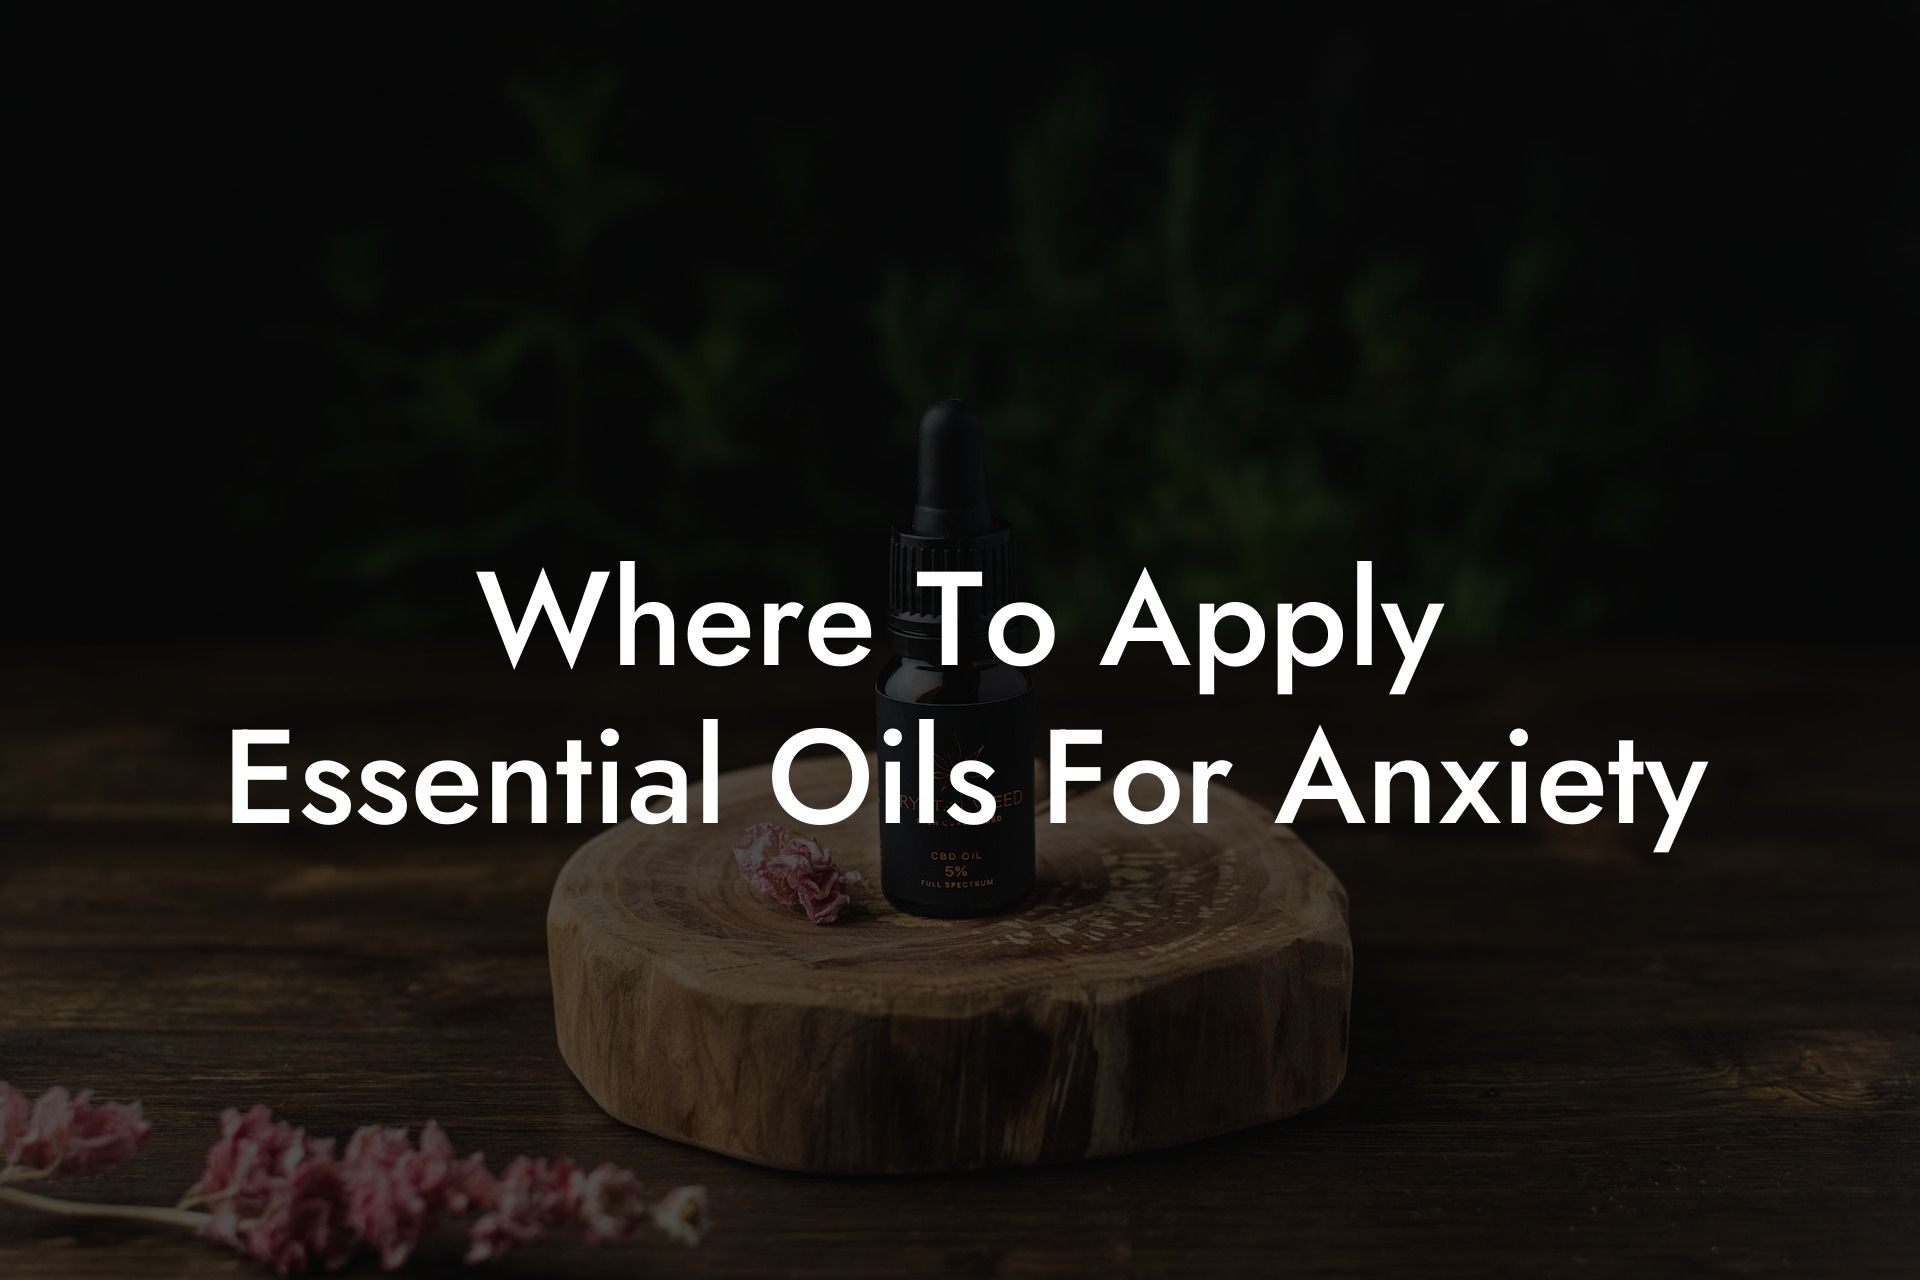 Where To Apply Essential Oils For Anxiety